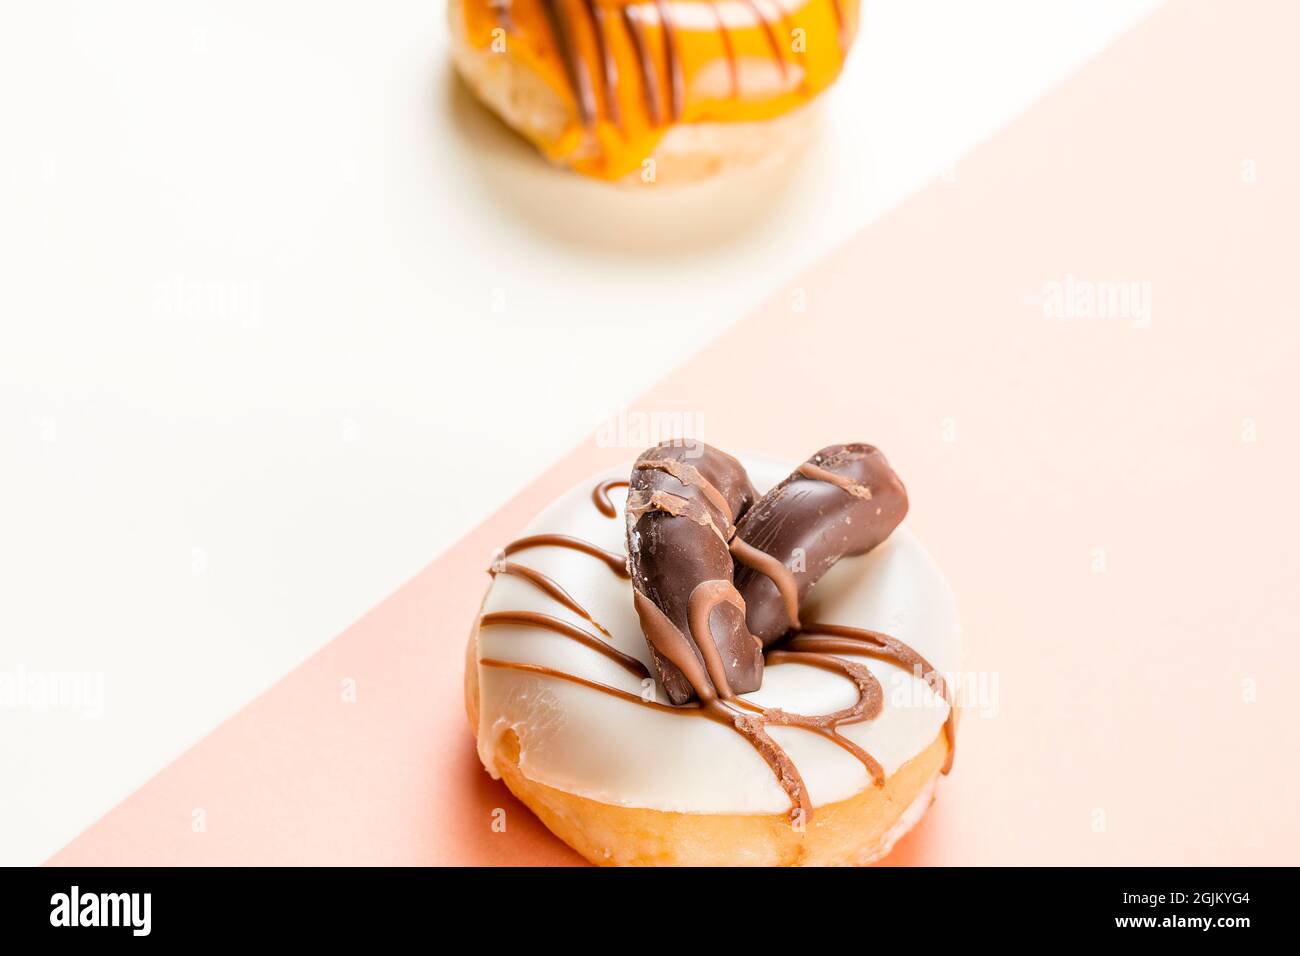 Close-up of a white donuts with chocolate chip cookies and a side of unfocused cream donuts.The photograph is taken in horizontal format and has a two Stock Photo